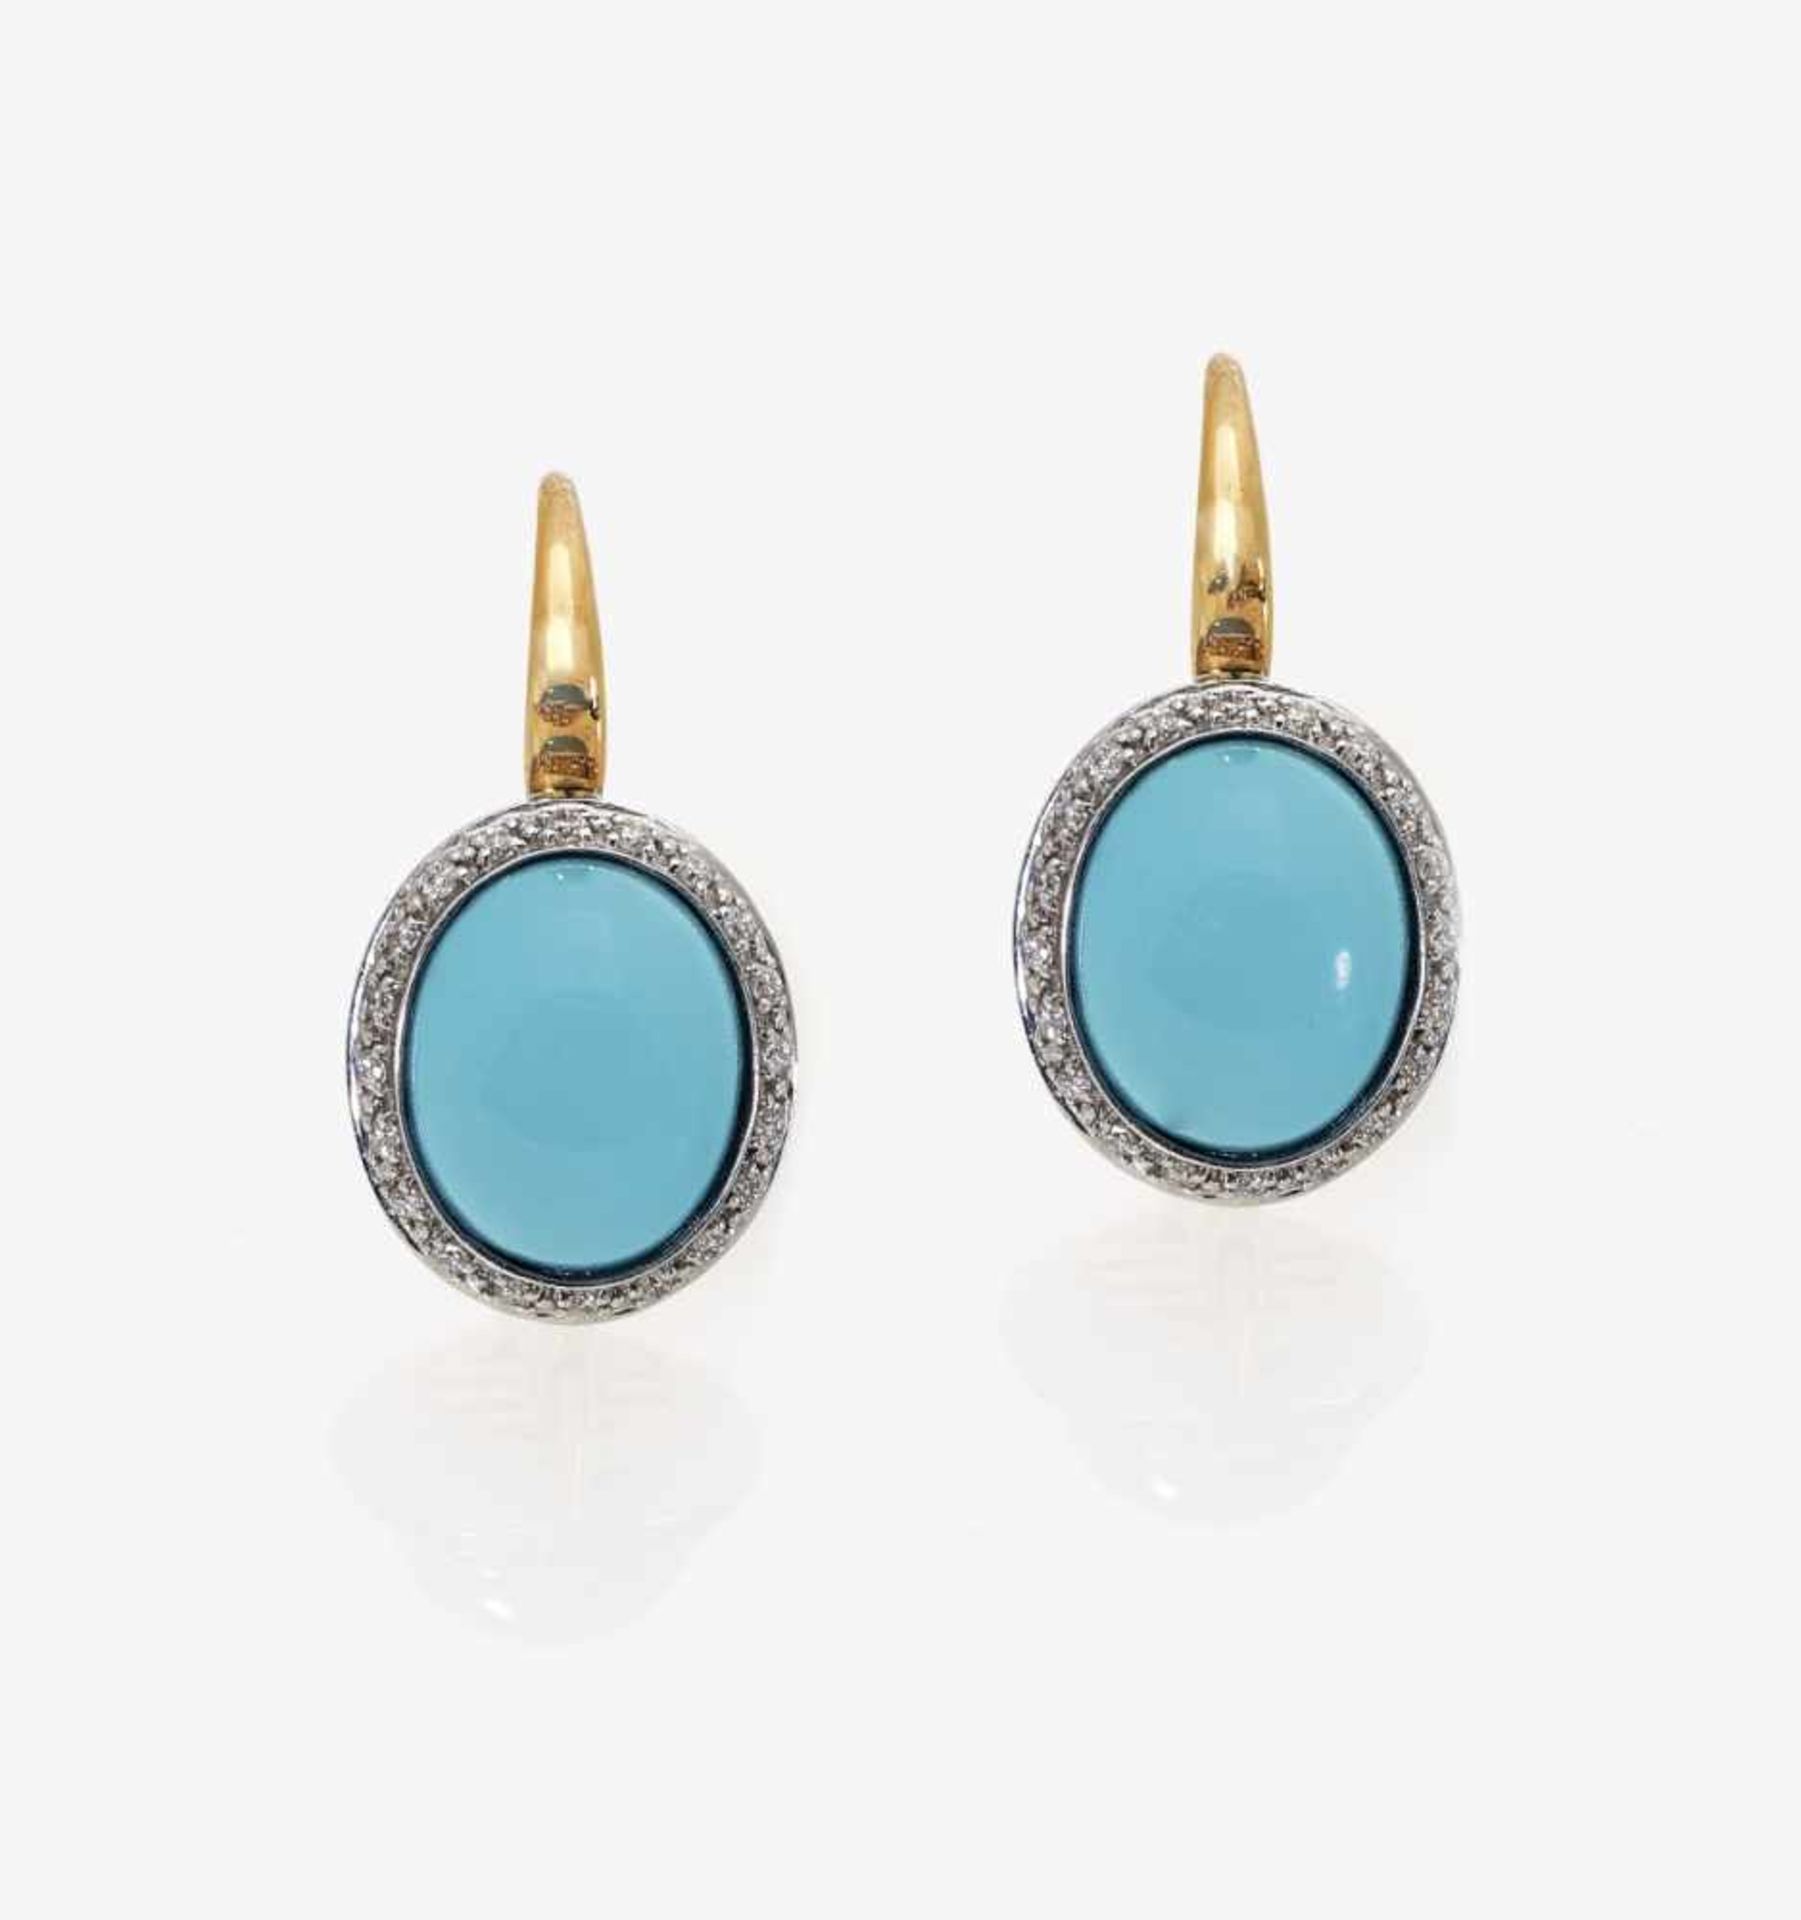 A Pair of Turquoise and Diamond EarringsMIMI 18K rose and white gold (750/-), stamped. Signed